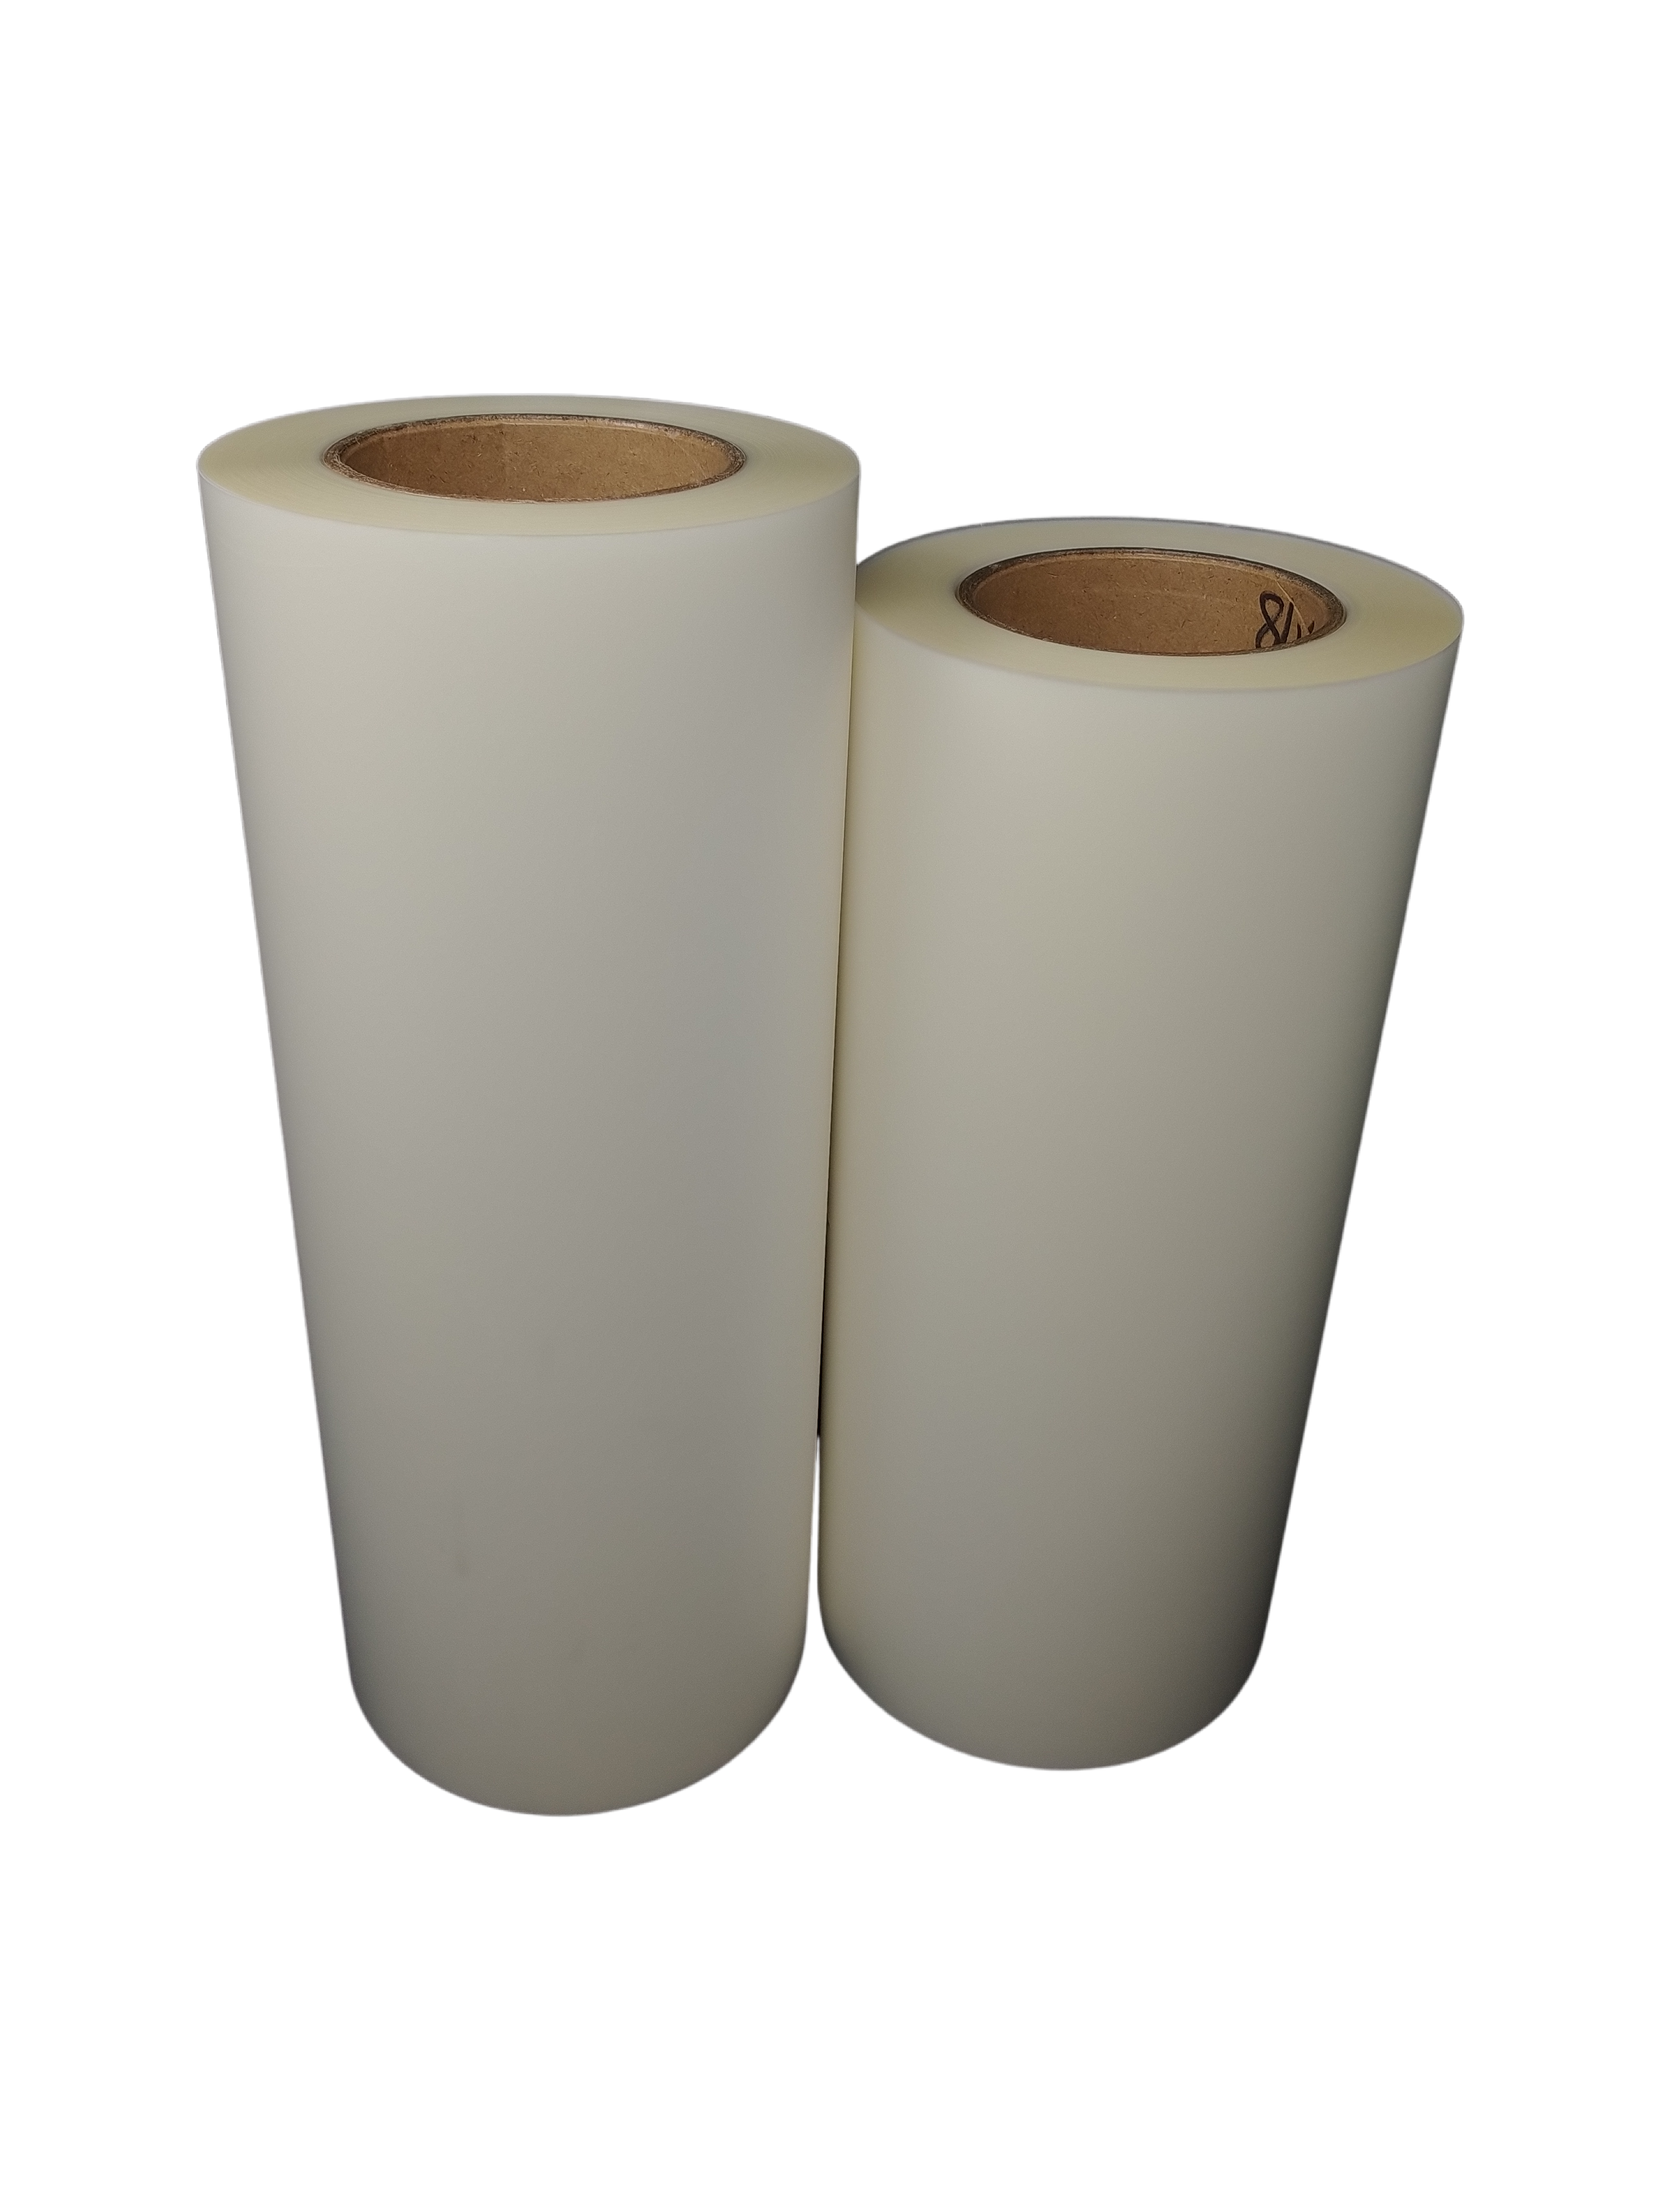 13" x 19" DTF Transfer Film - Cold Peel - 100 Sheets/pack